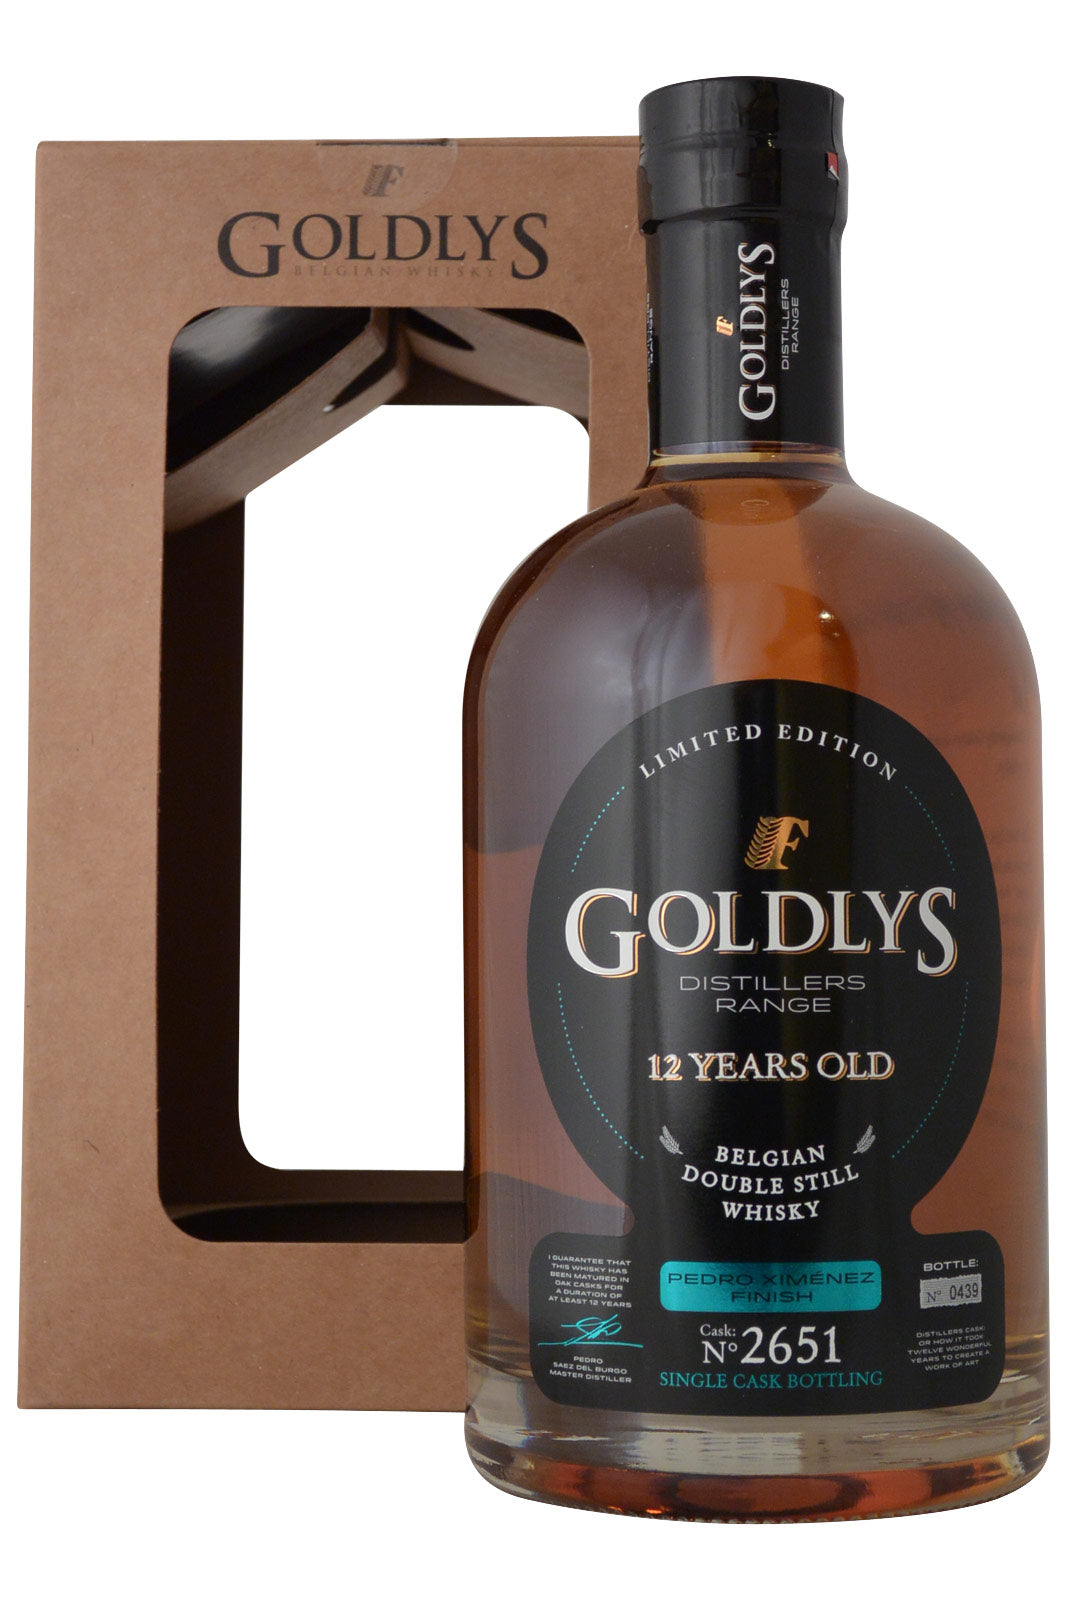 Goldlys 12 Year Old Double Still Cask N°2651